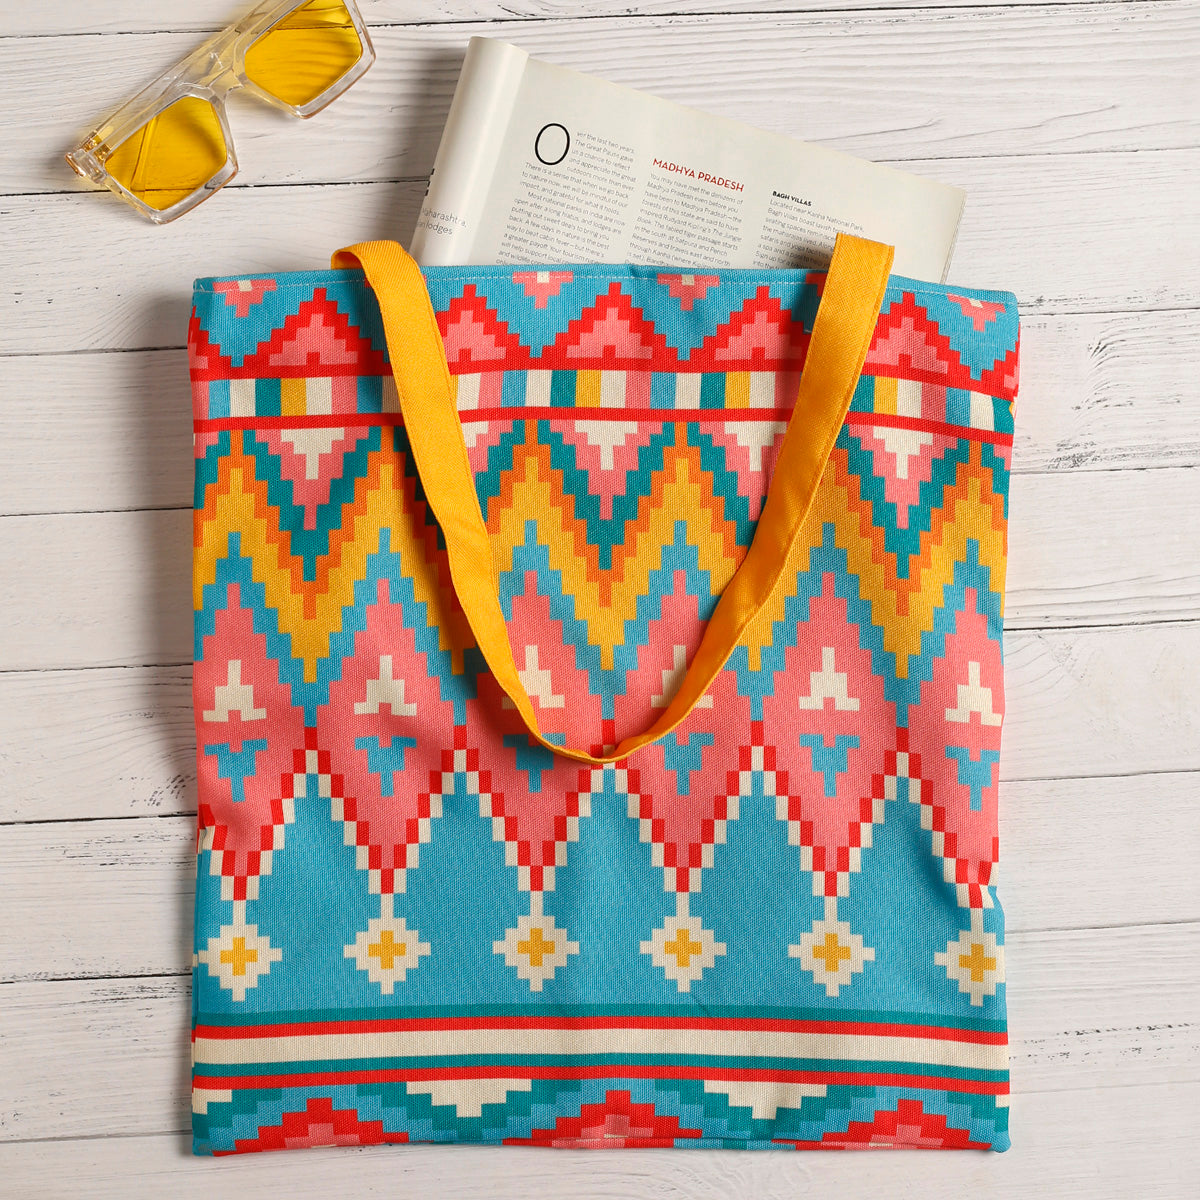 Vibrant tote bag featuring a geometric design with color yellow teal & red, ideal for carrying your essentials in style.